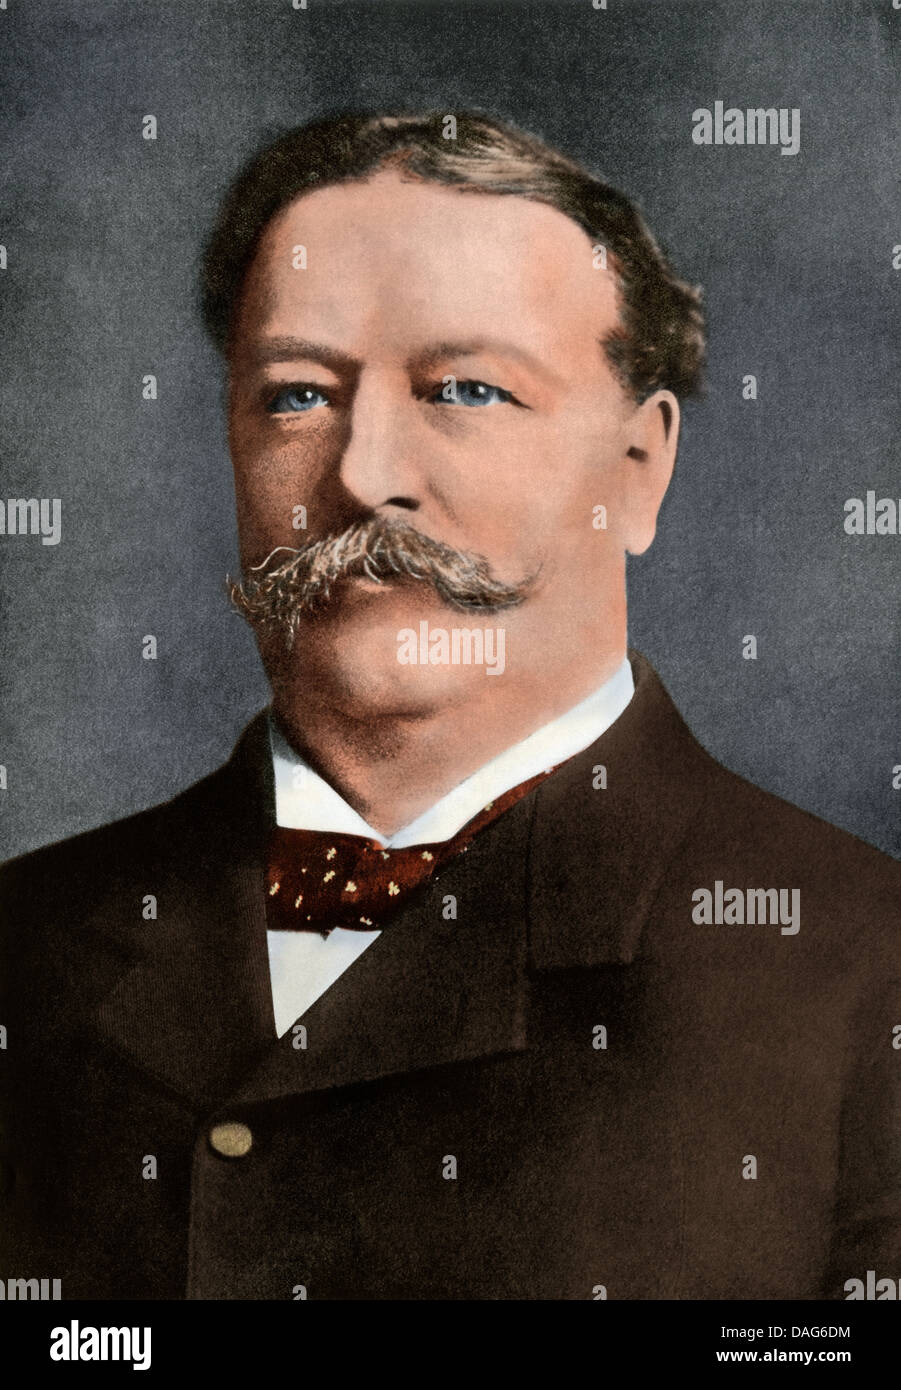 Portrait of William Howard Taft when he was Theodore Roosevelt's Secretary of War, 1904. Digitally colored halftone of a photograph Stock Photo